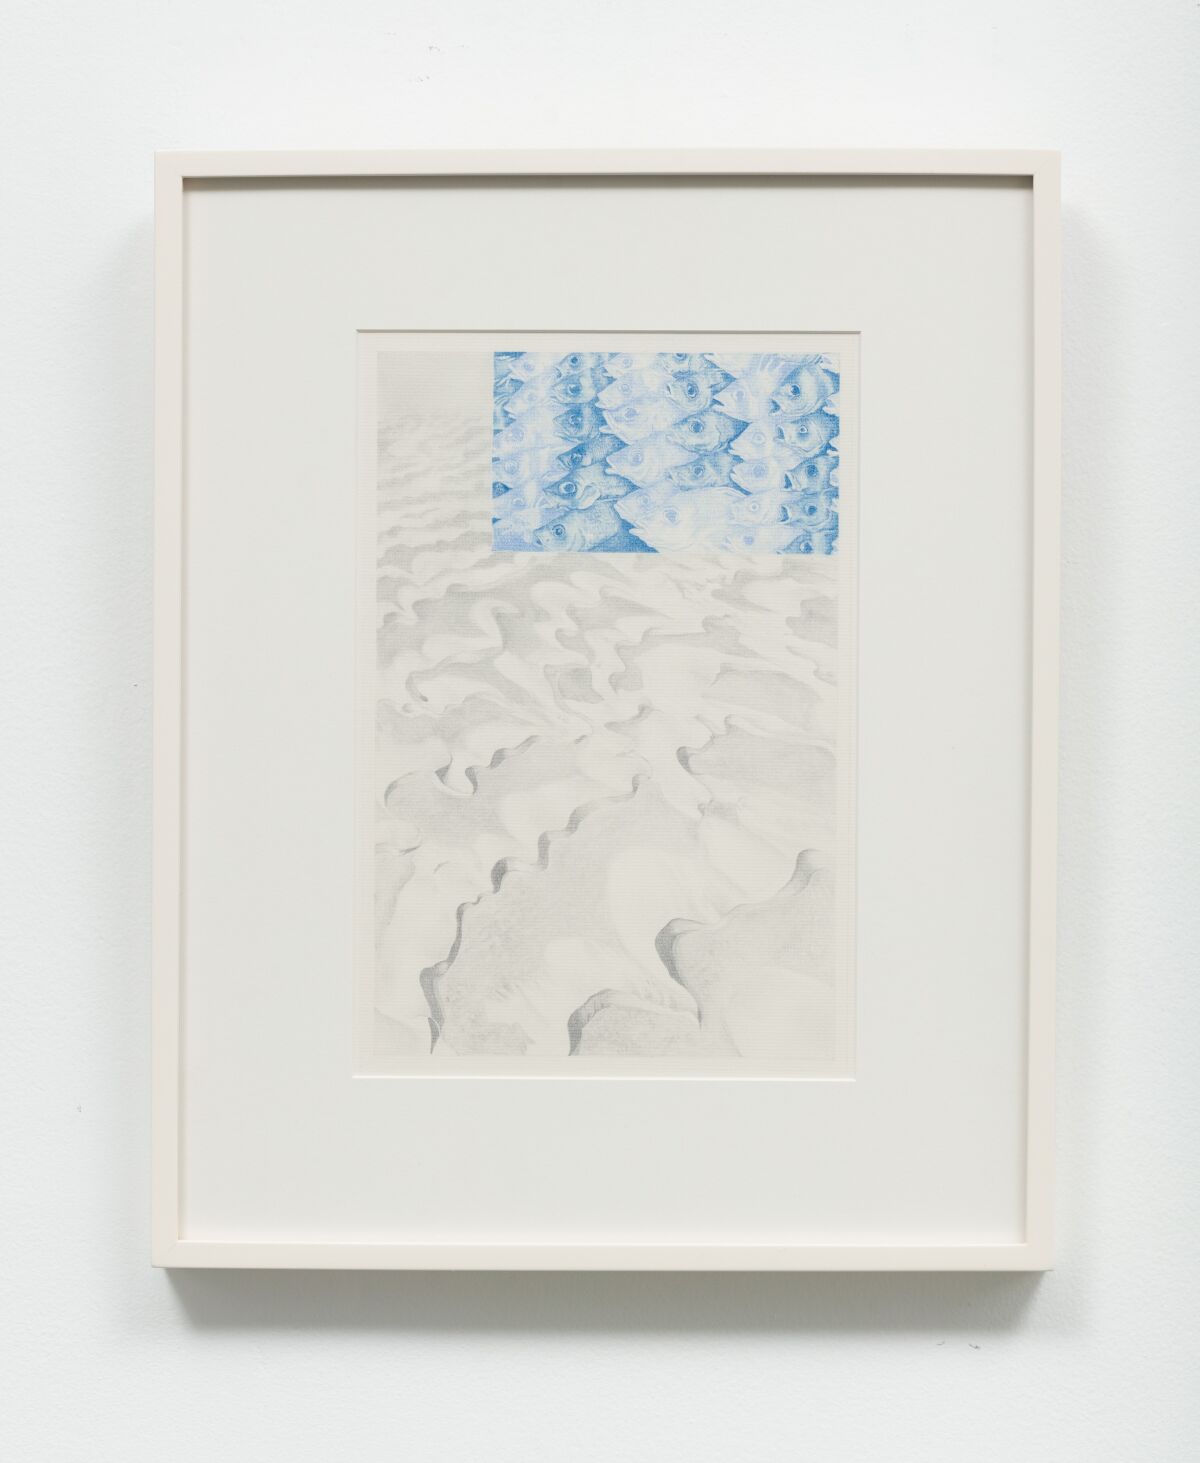 "From Dreams #16” by Nancy Buchanan, 1976. Pencil pastel on paper, conservation glass, 20.75 inches by 16.75 inches.